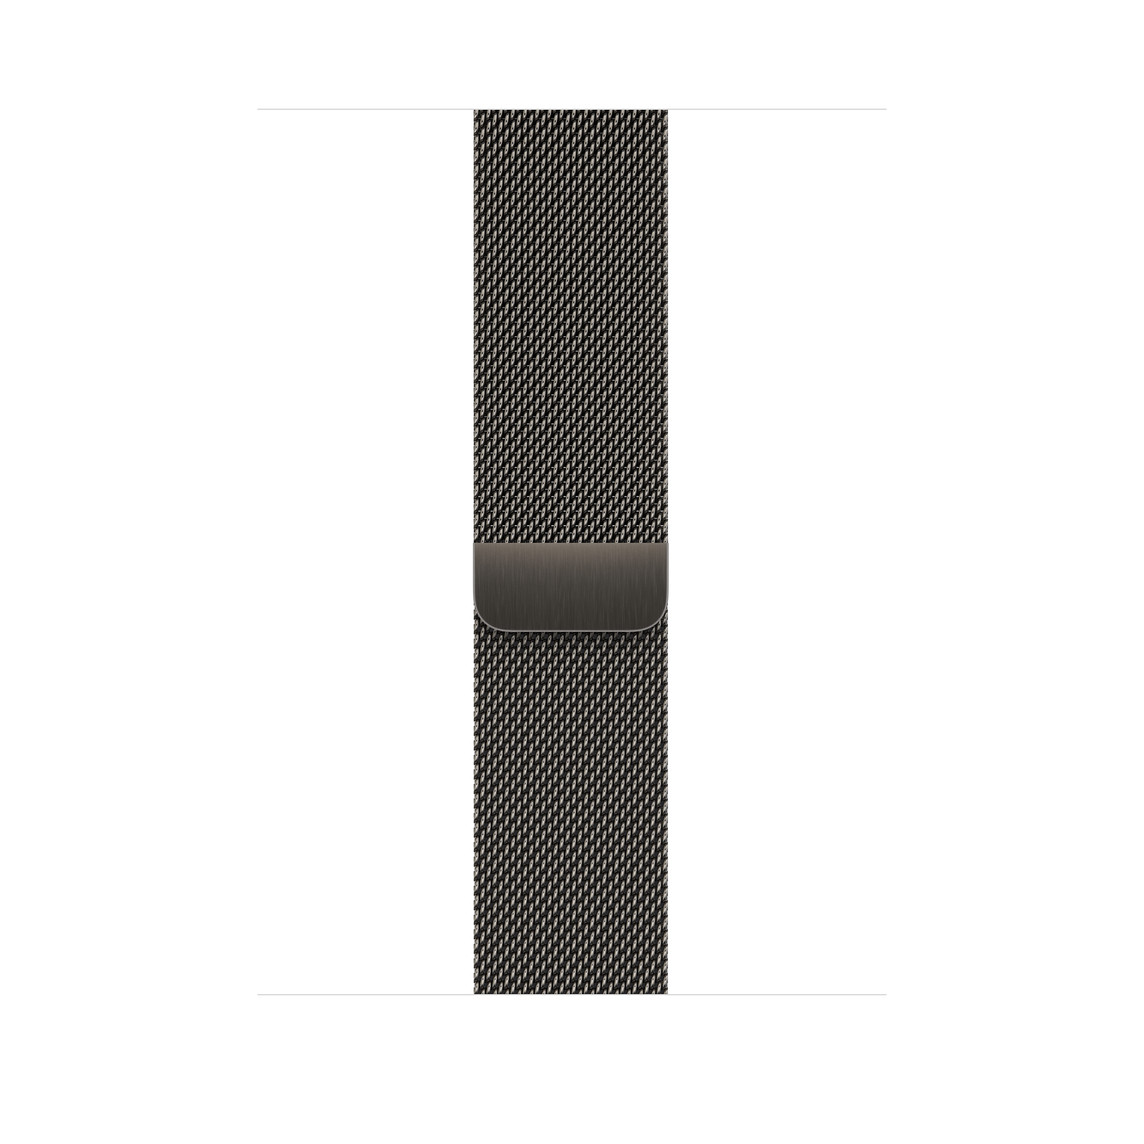 Graphite (dark grey) Milanese Loop strap, polished stainless steel mesh with magnetic closure